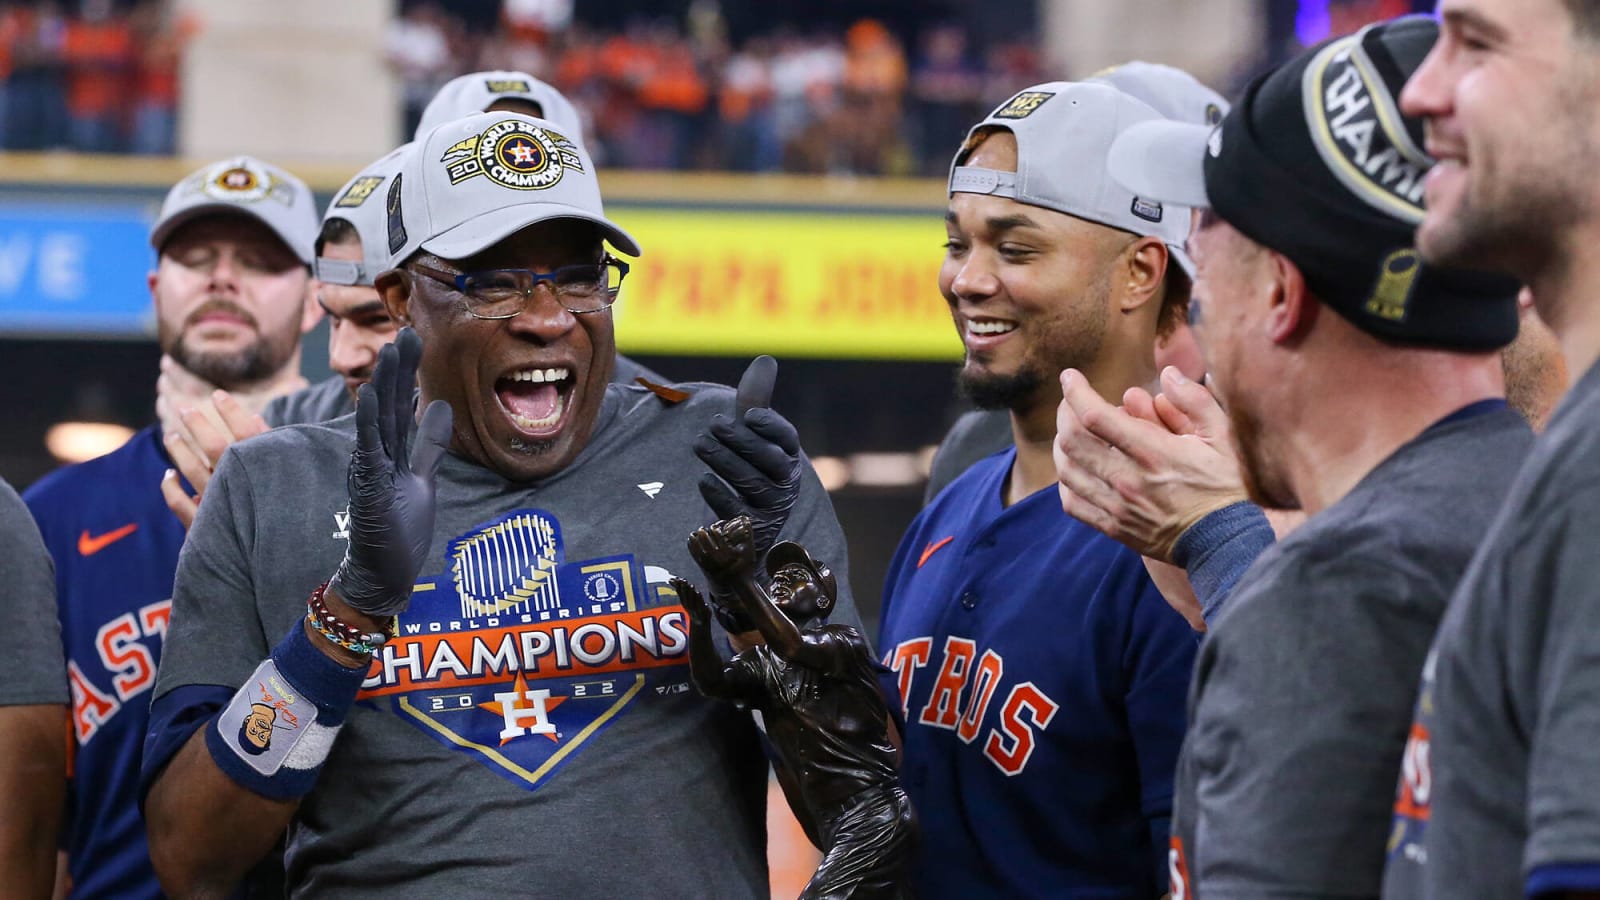 Video: Dusty Baker does beer luge after winning World Series